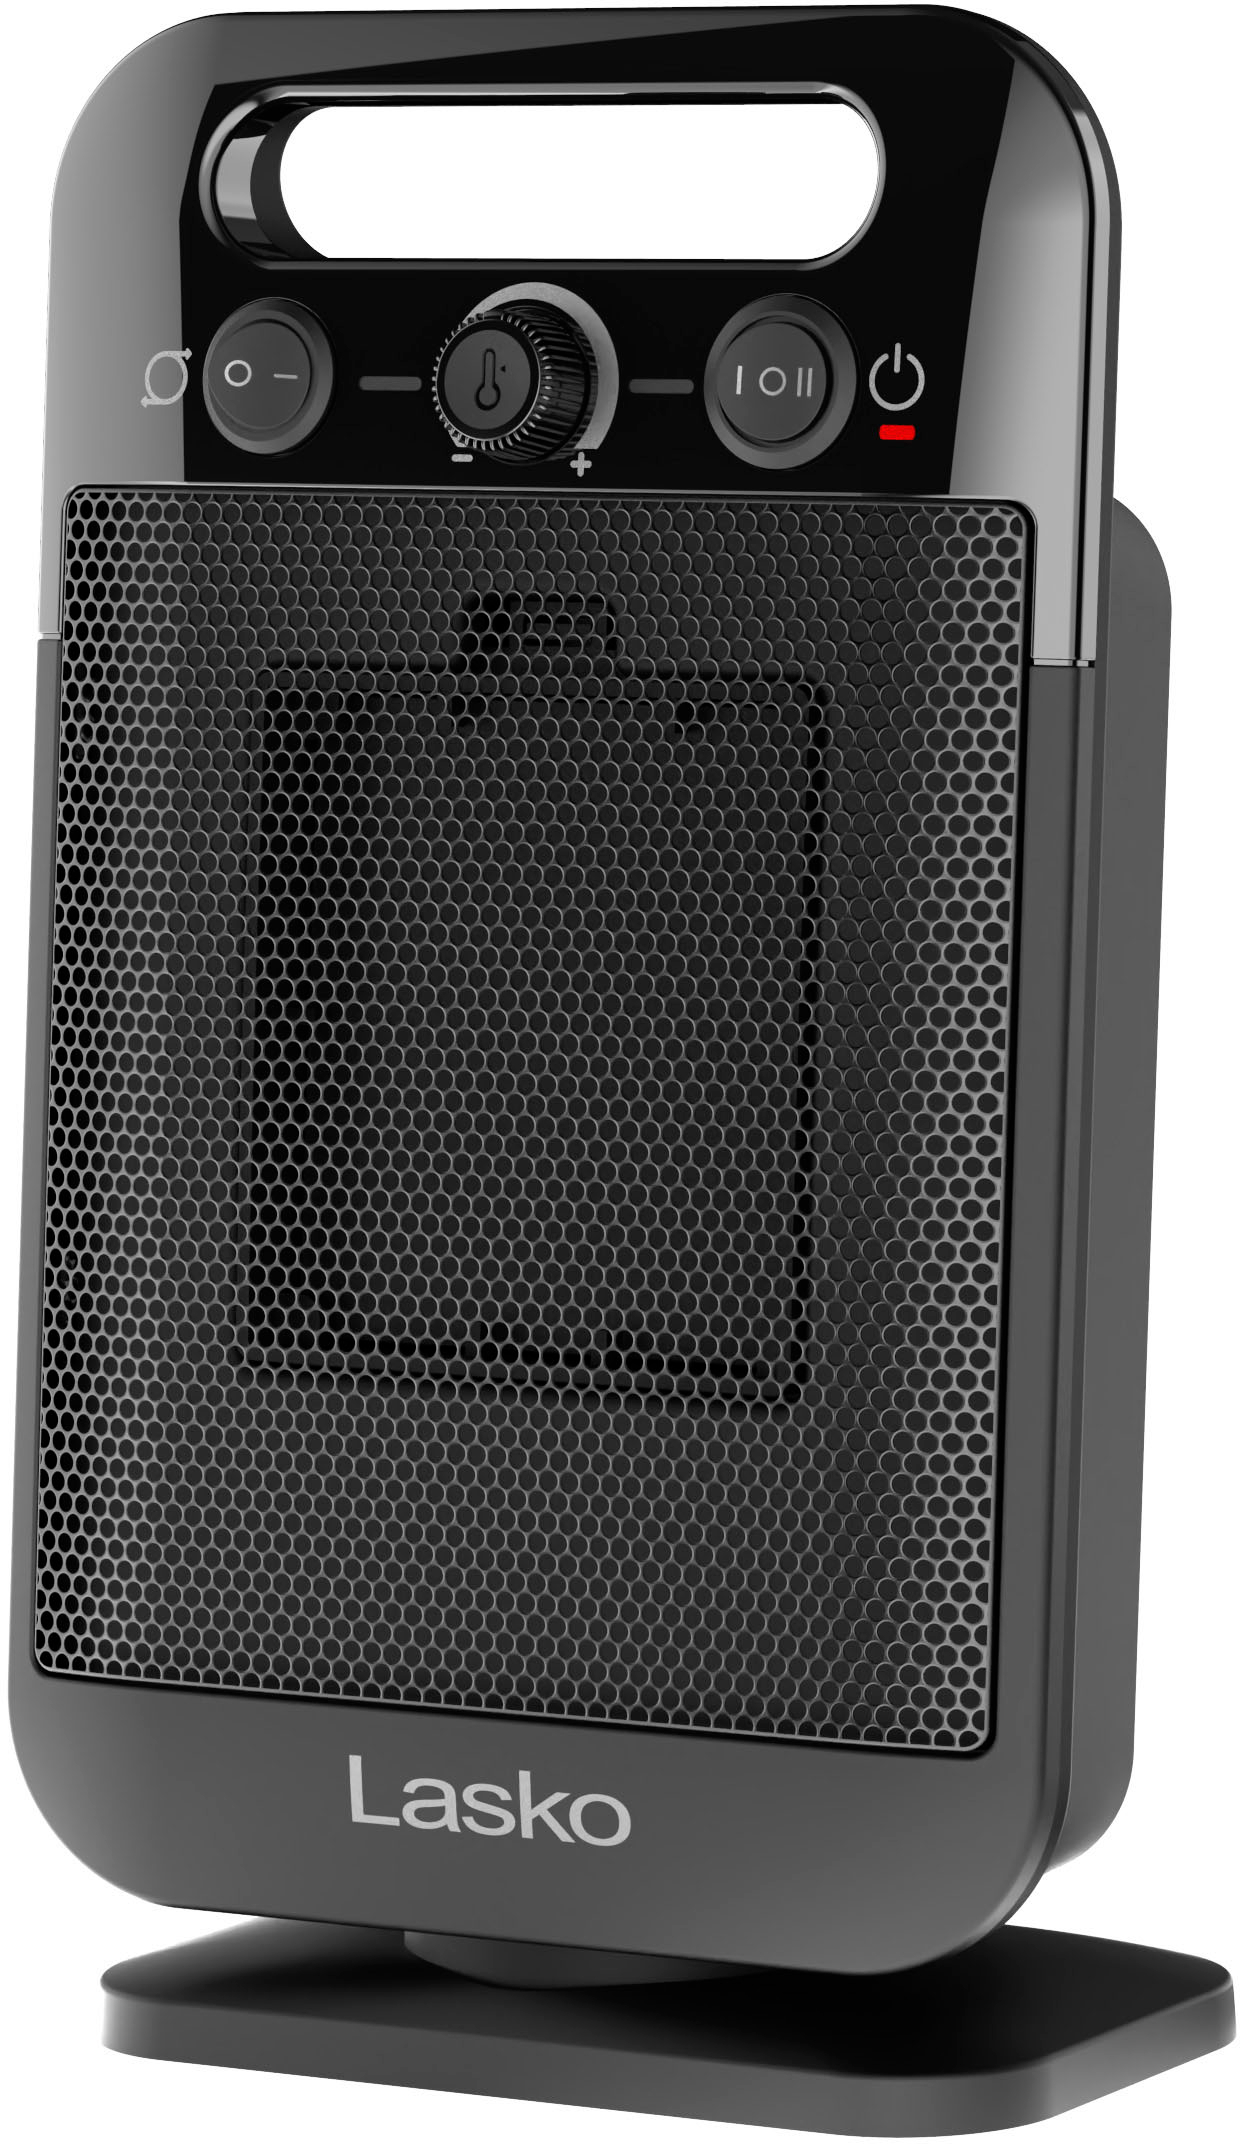 Angle View: Lasko - 1500-Watt Oscillating Personal Tabletop Ceramic Space Heater with Adjustable Thermostat - Black